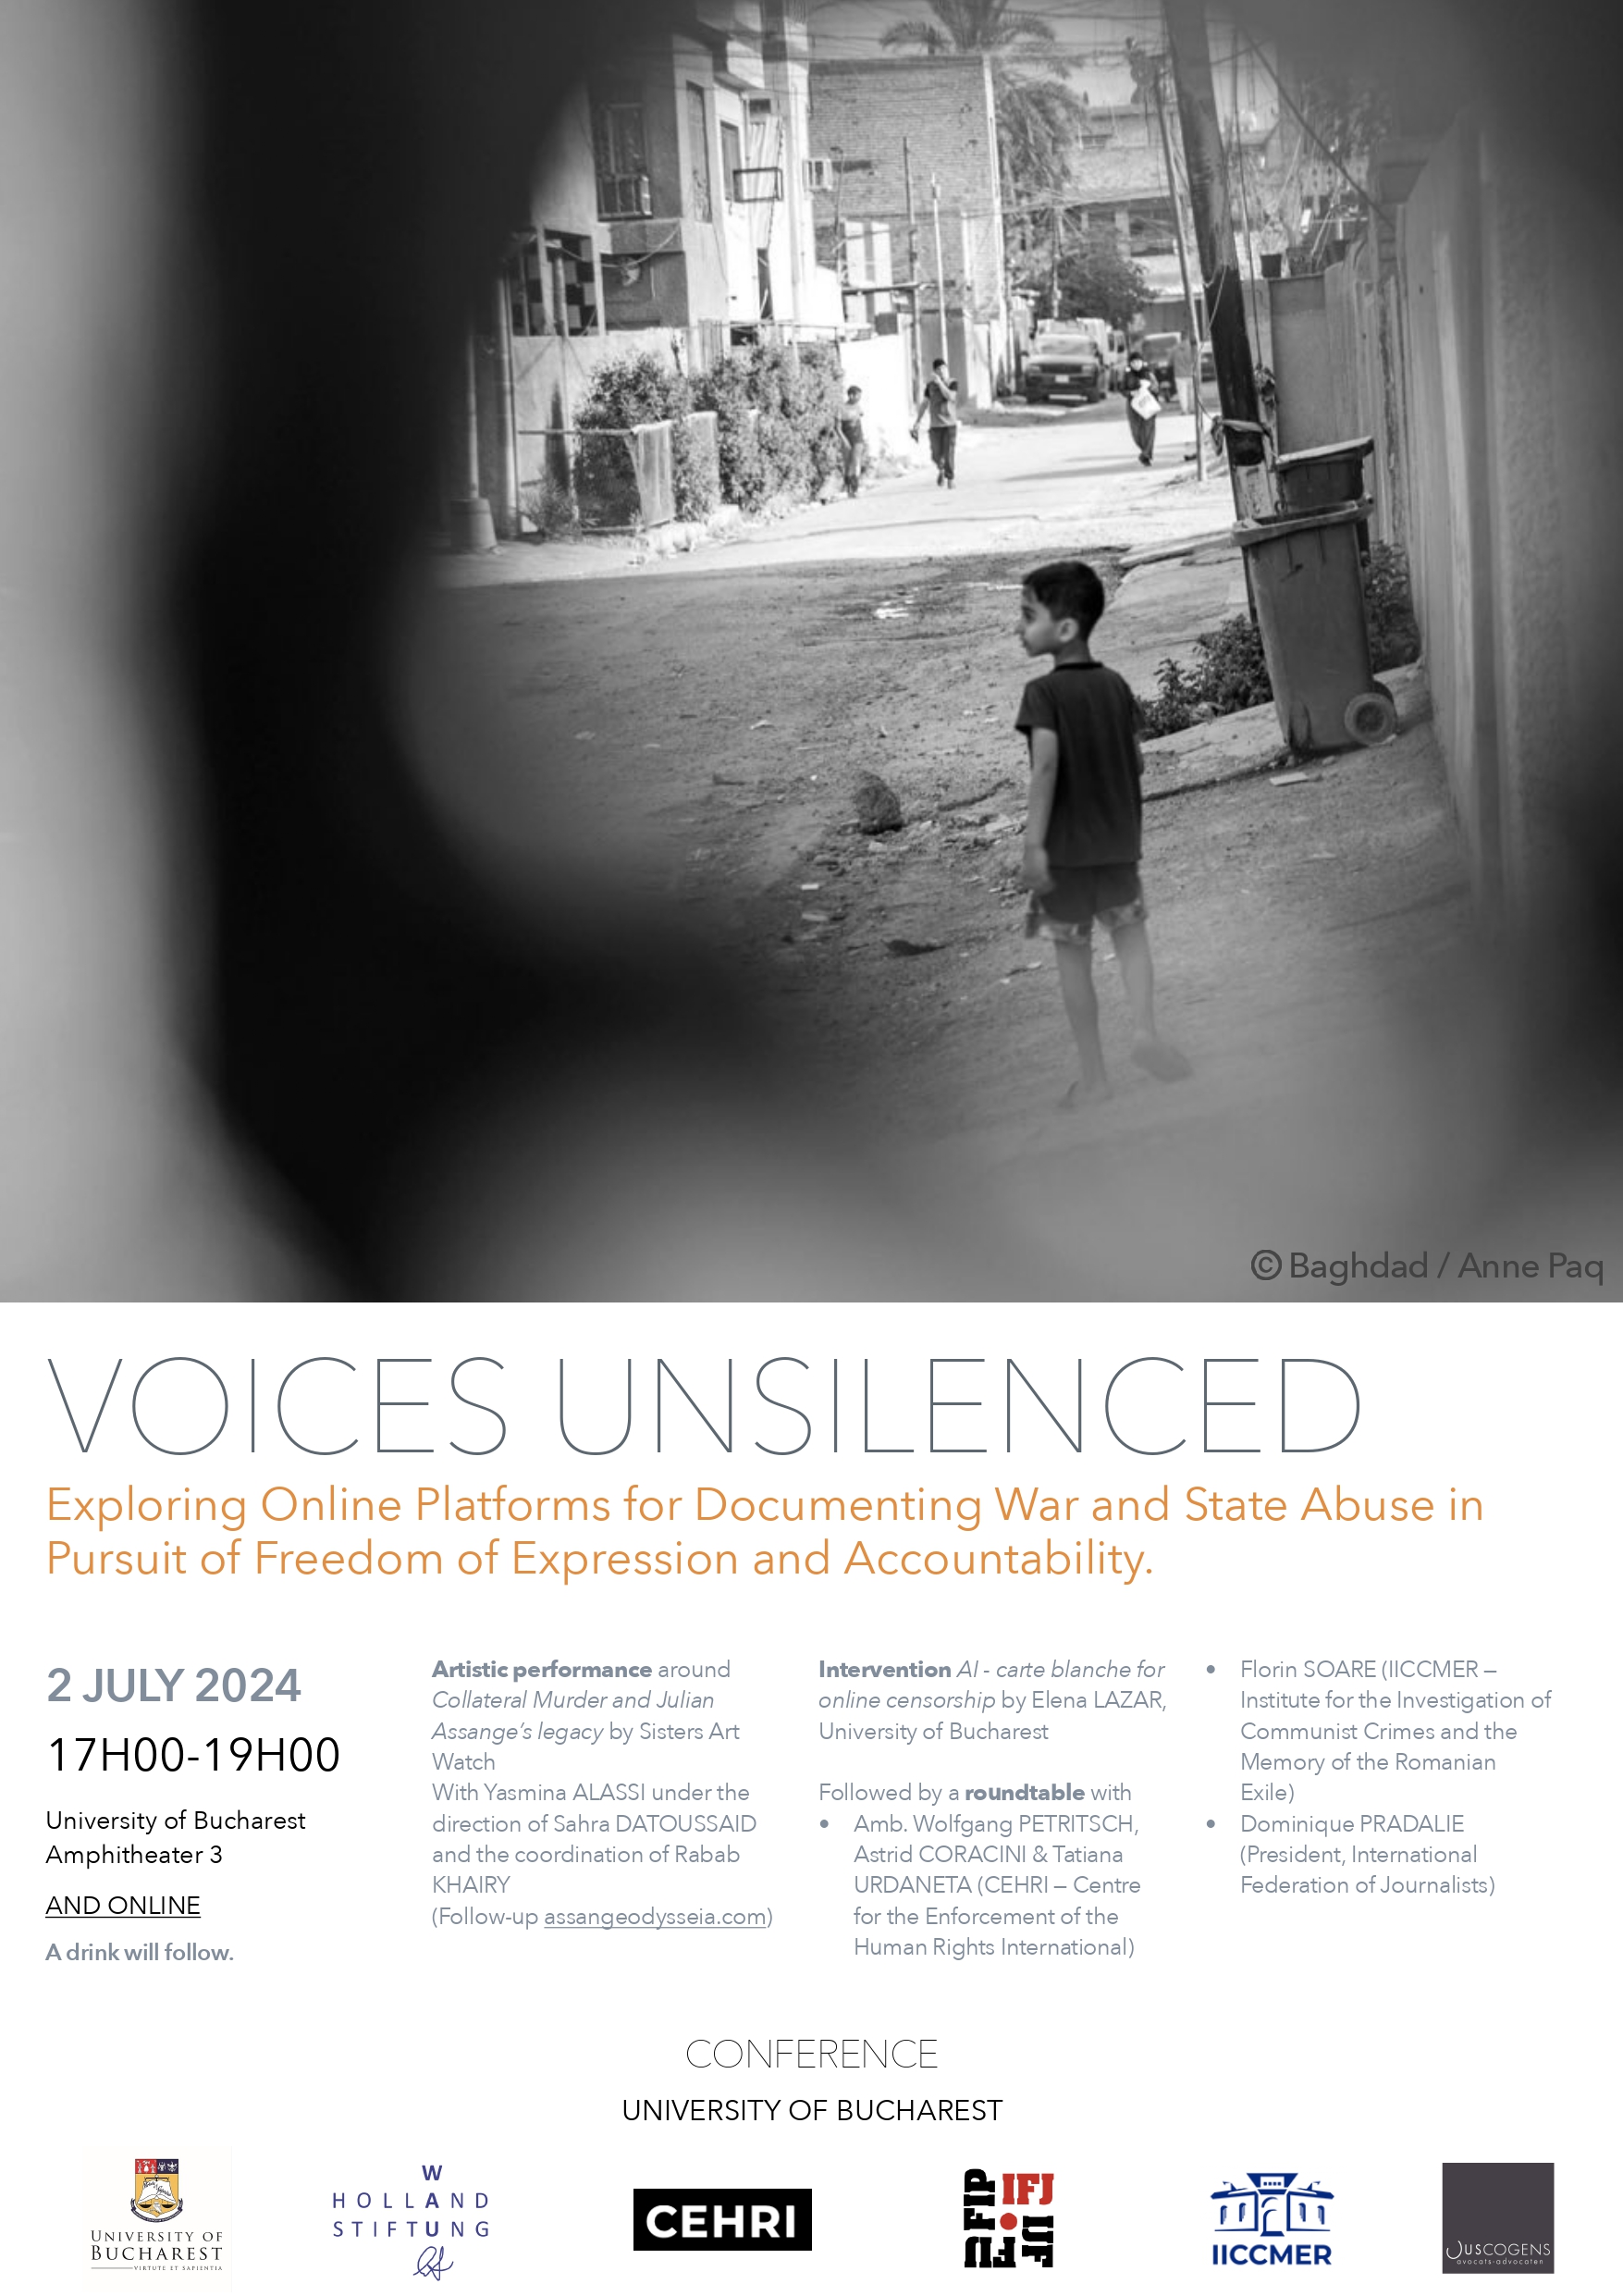 VOICES UNSILENCED: Exploring Online Platforms for Documenting War and State Abuse in Pursuit of Freedom of Expression and Accountability